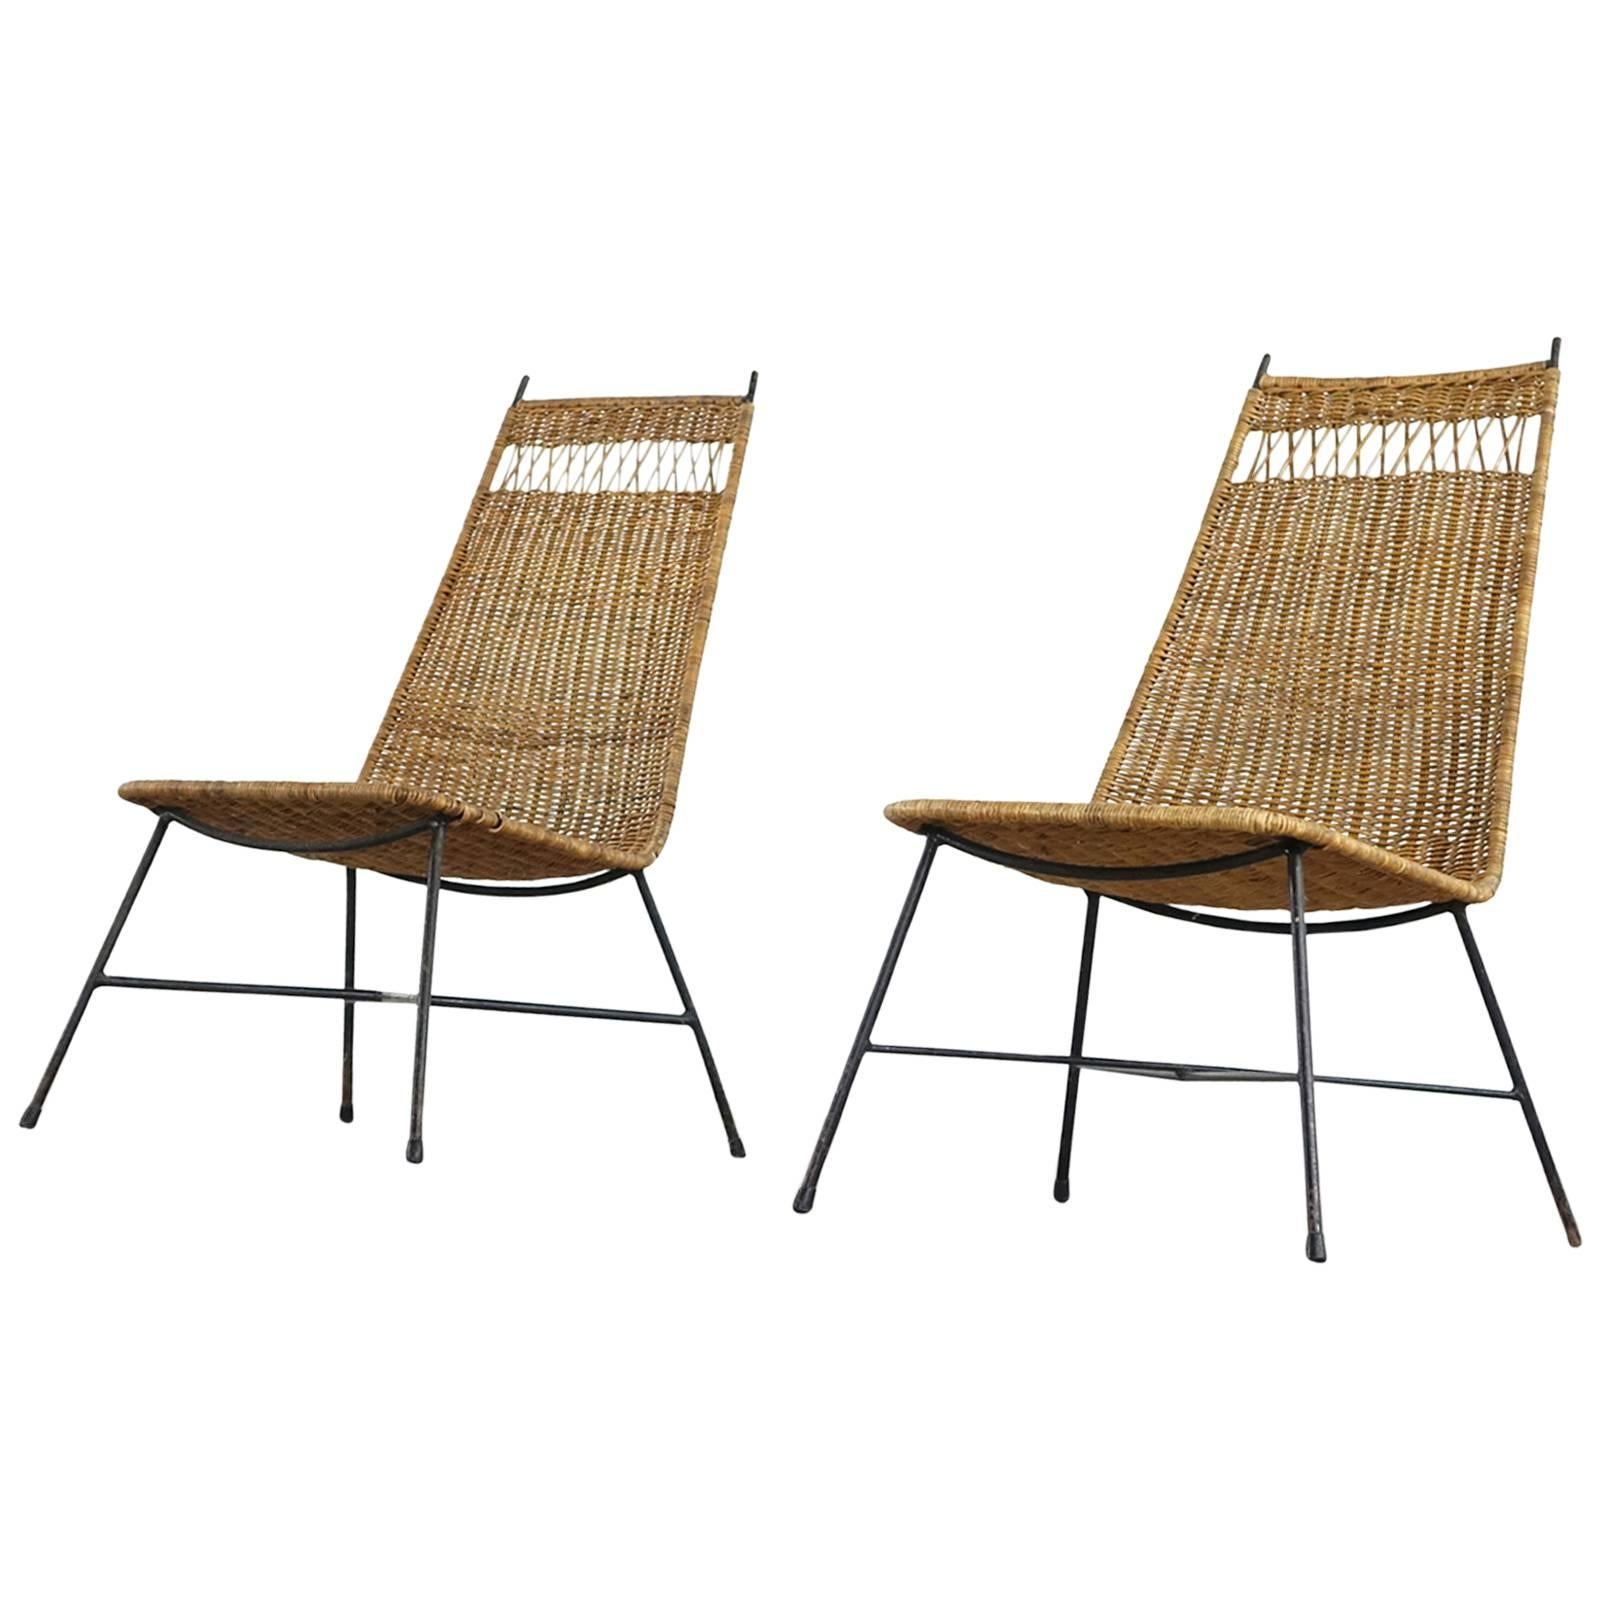 Nice Pair of Mid-Century Modern Wicker Basket Lounge Chairs from France